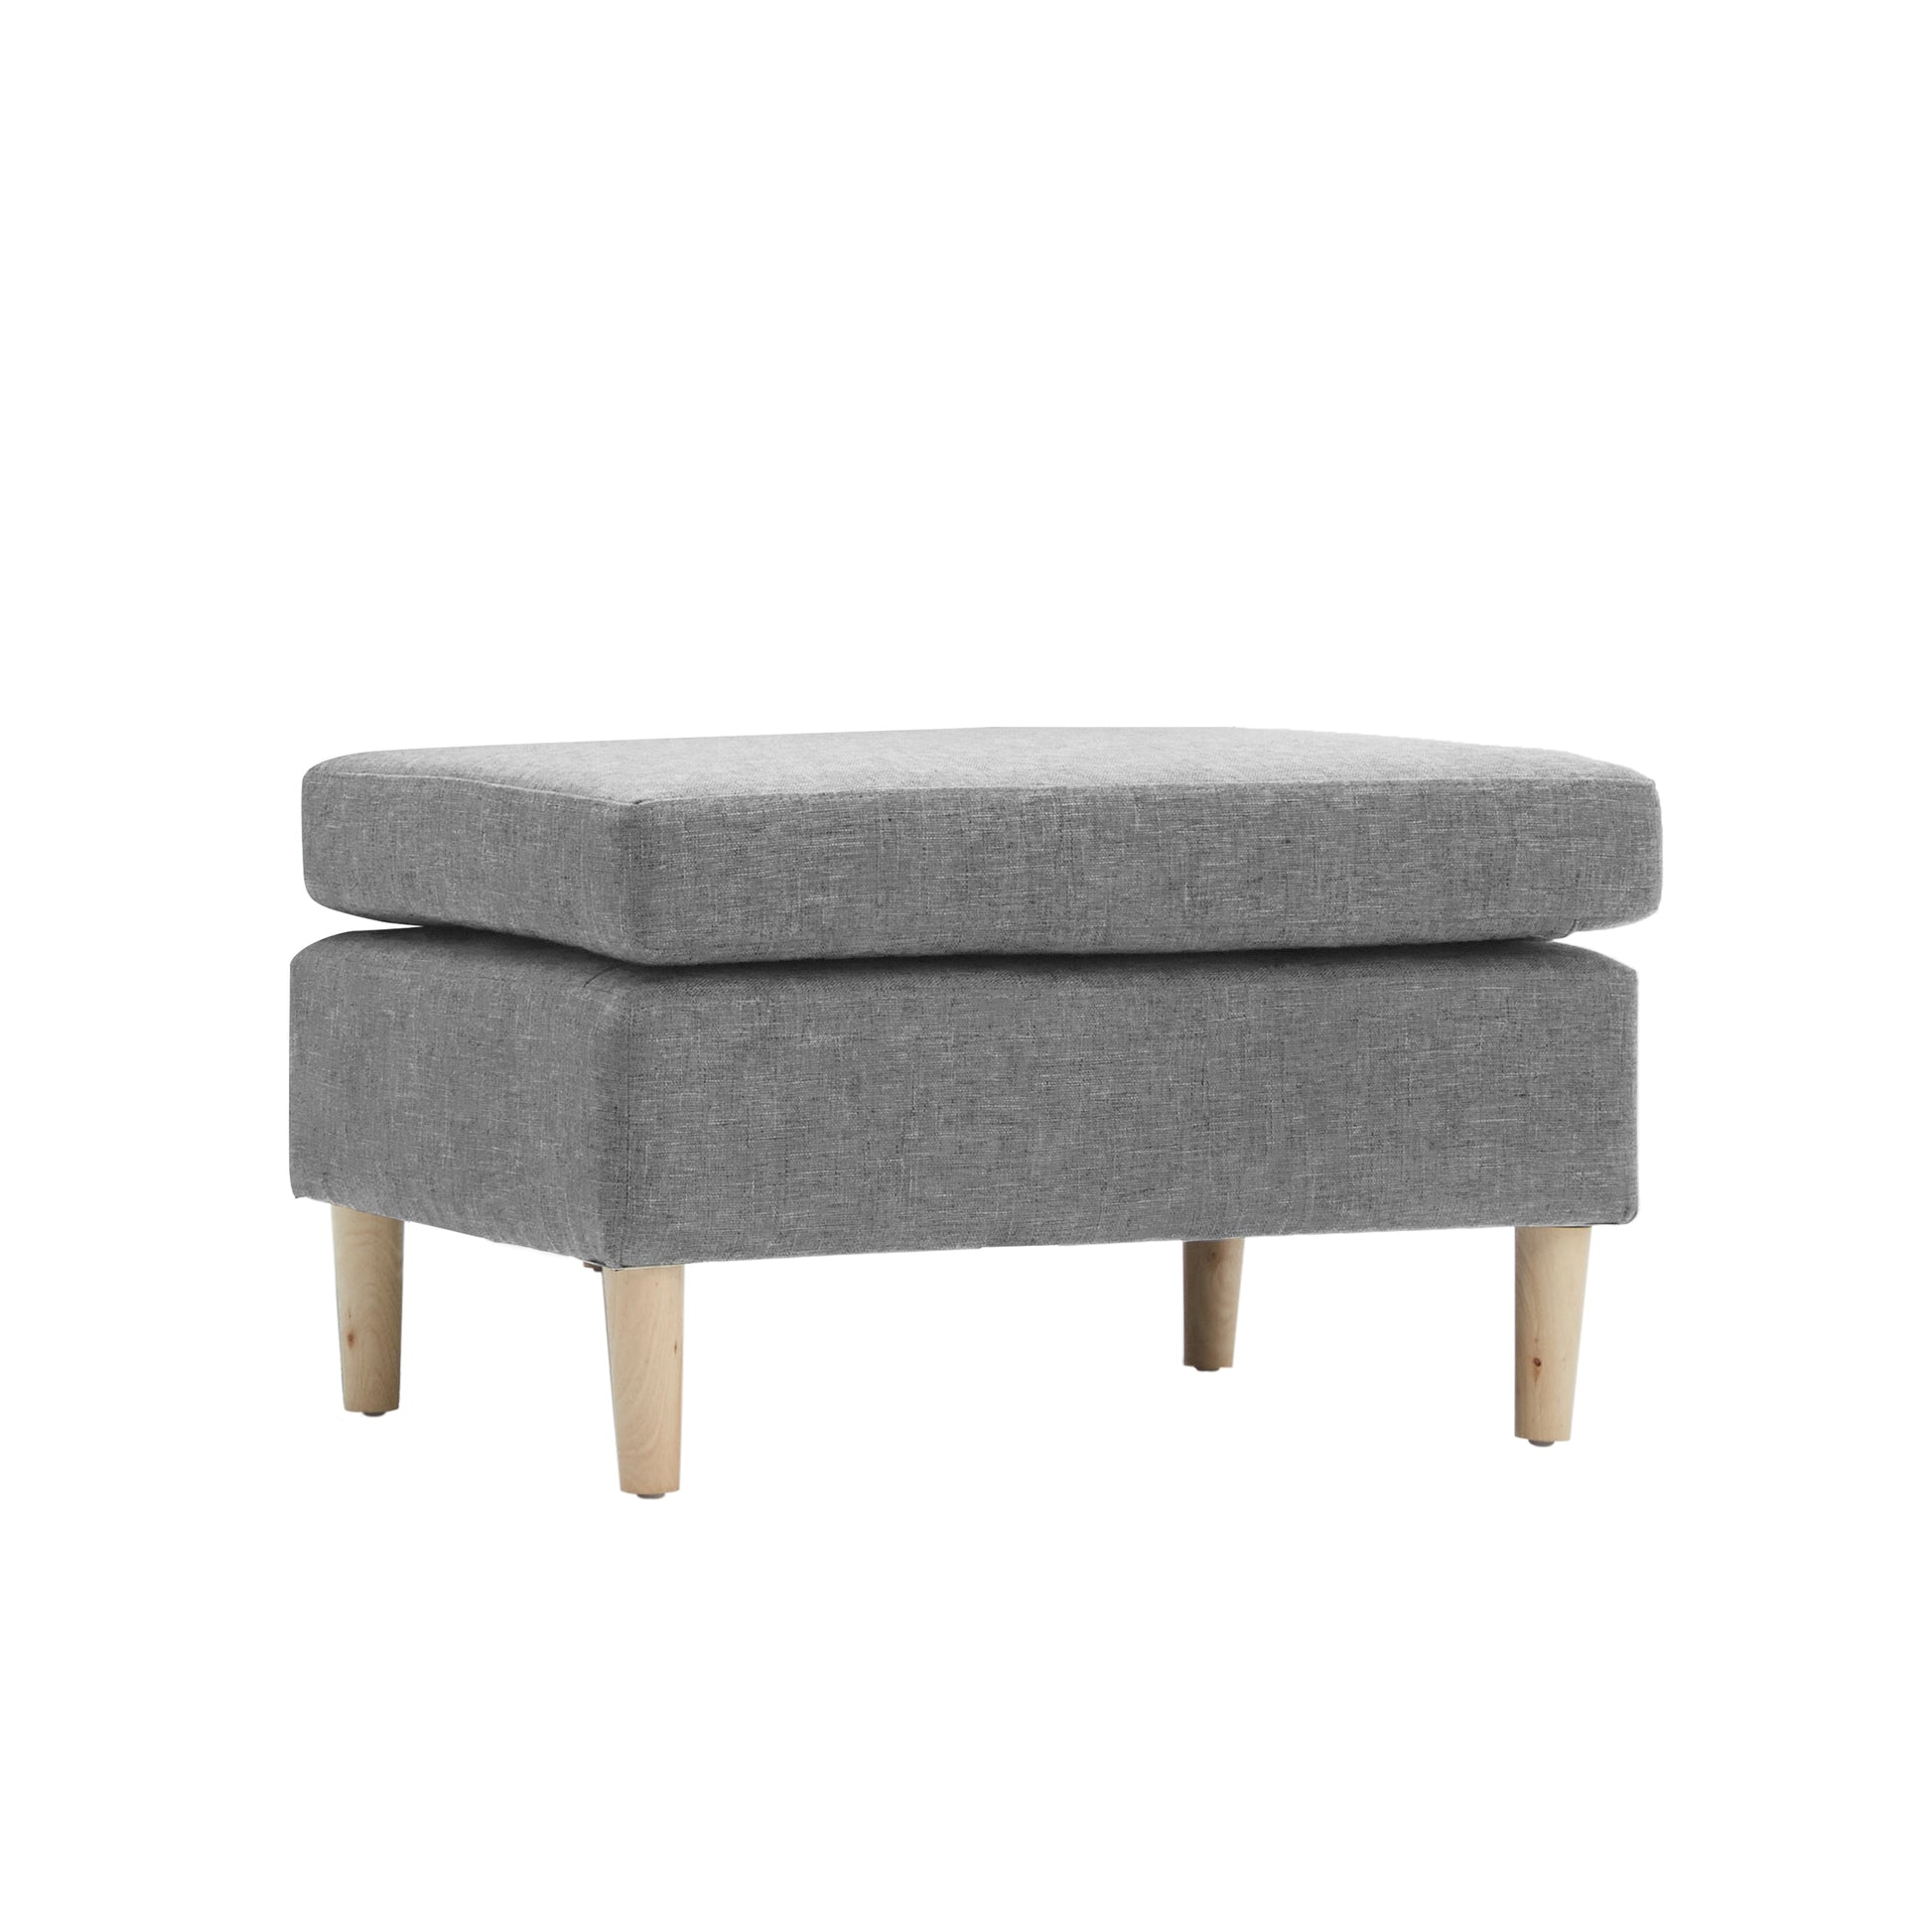 Tinker Sofa - Cocoon Series (Ottoman Only) Tinker Furniture PH